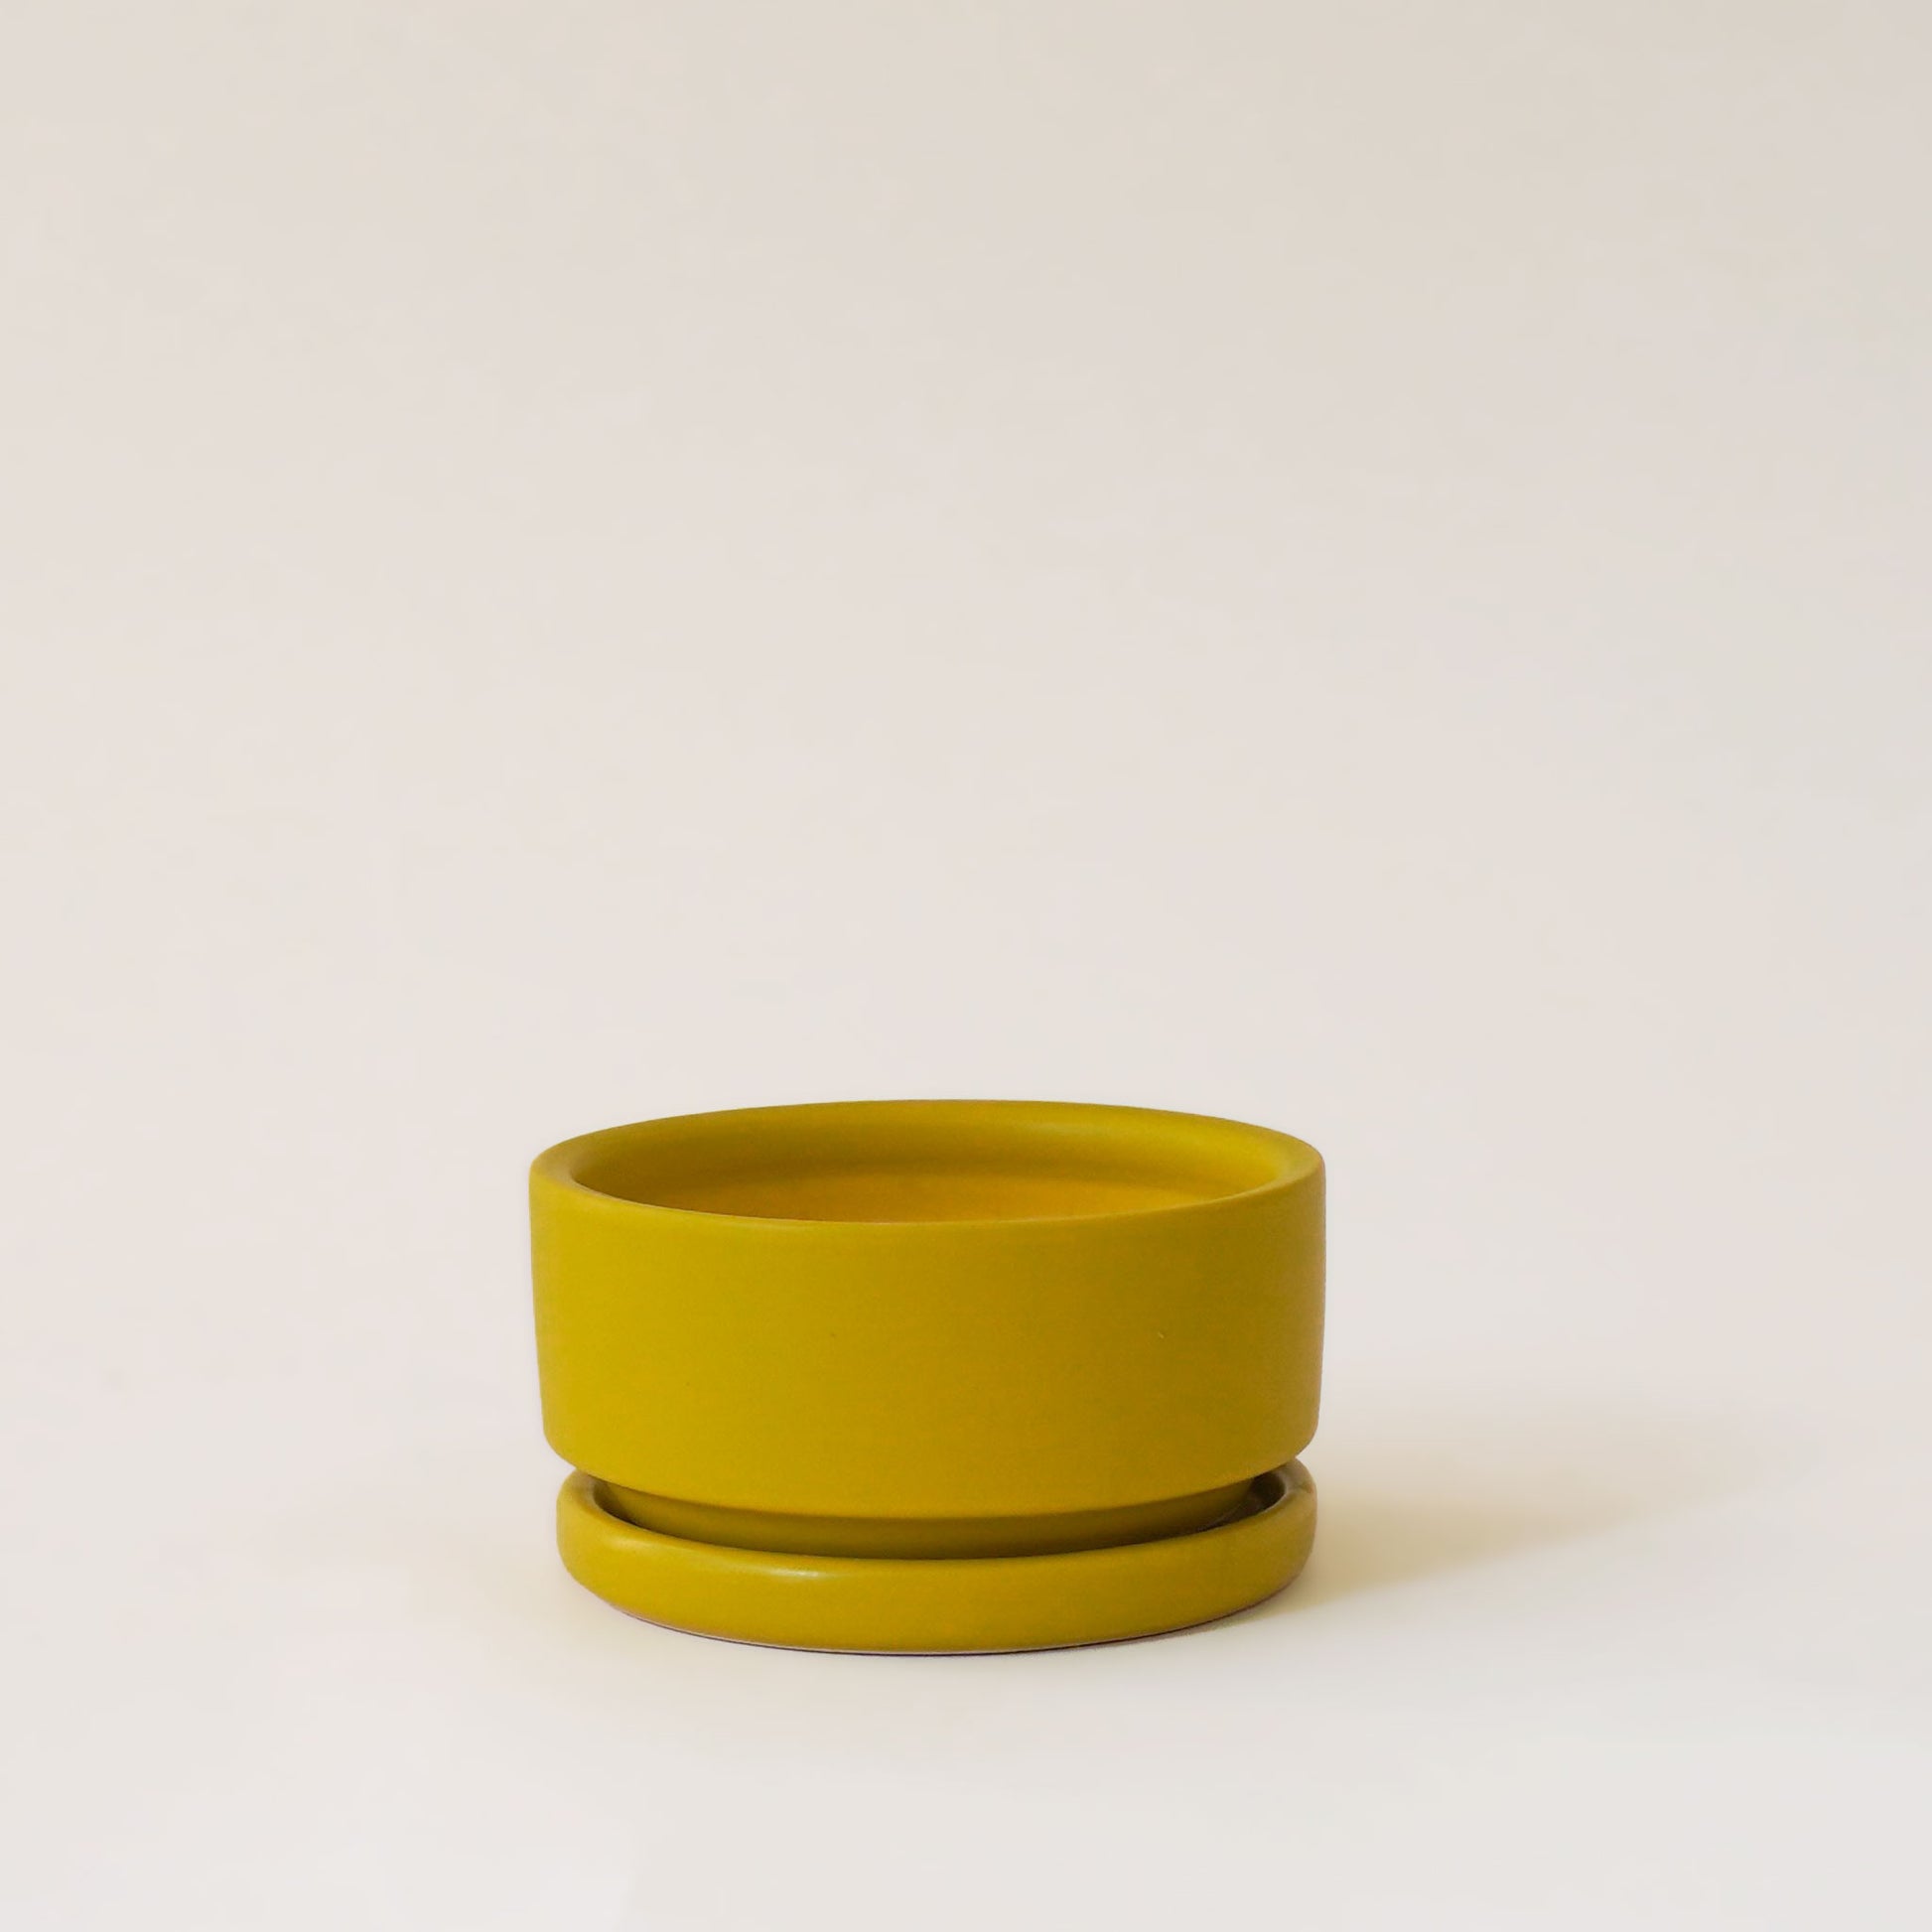 Chartreuse short and wide bowl planter complete with matching water tray below.